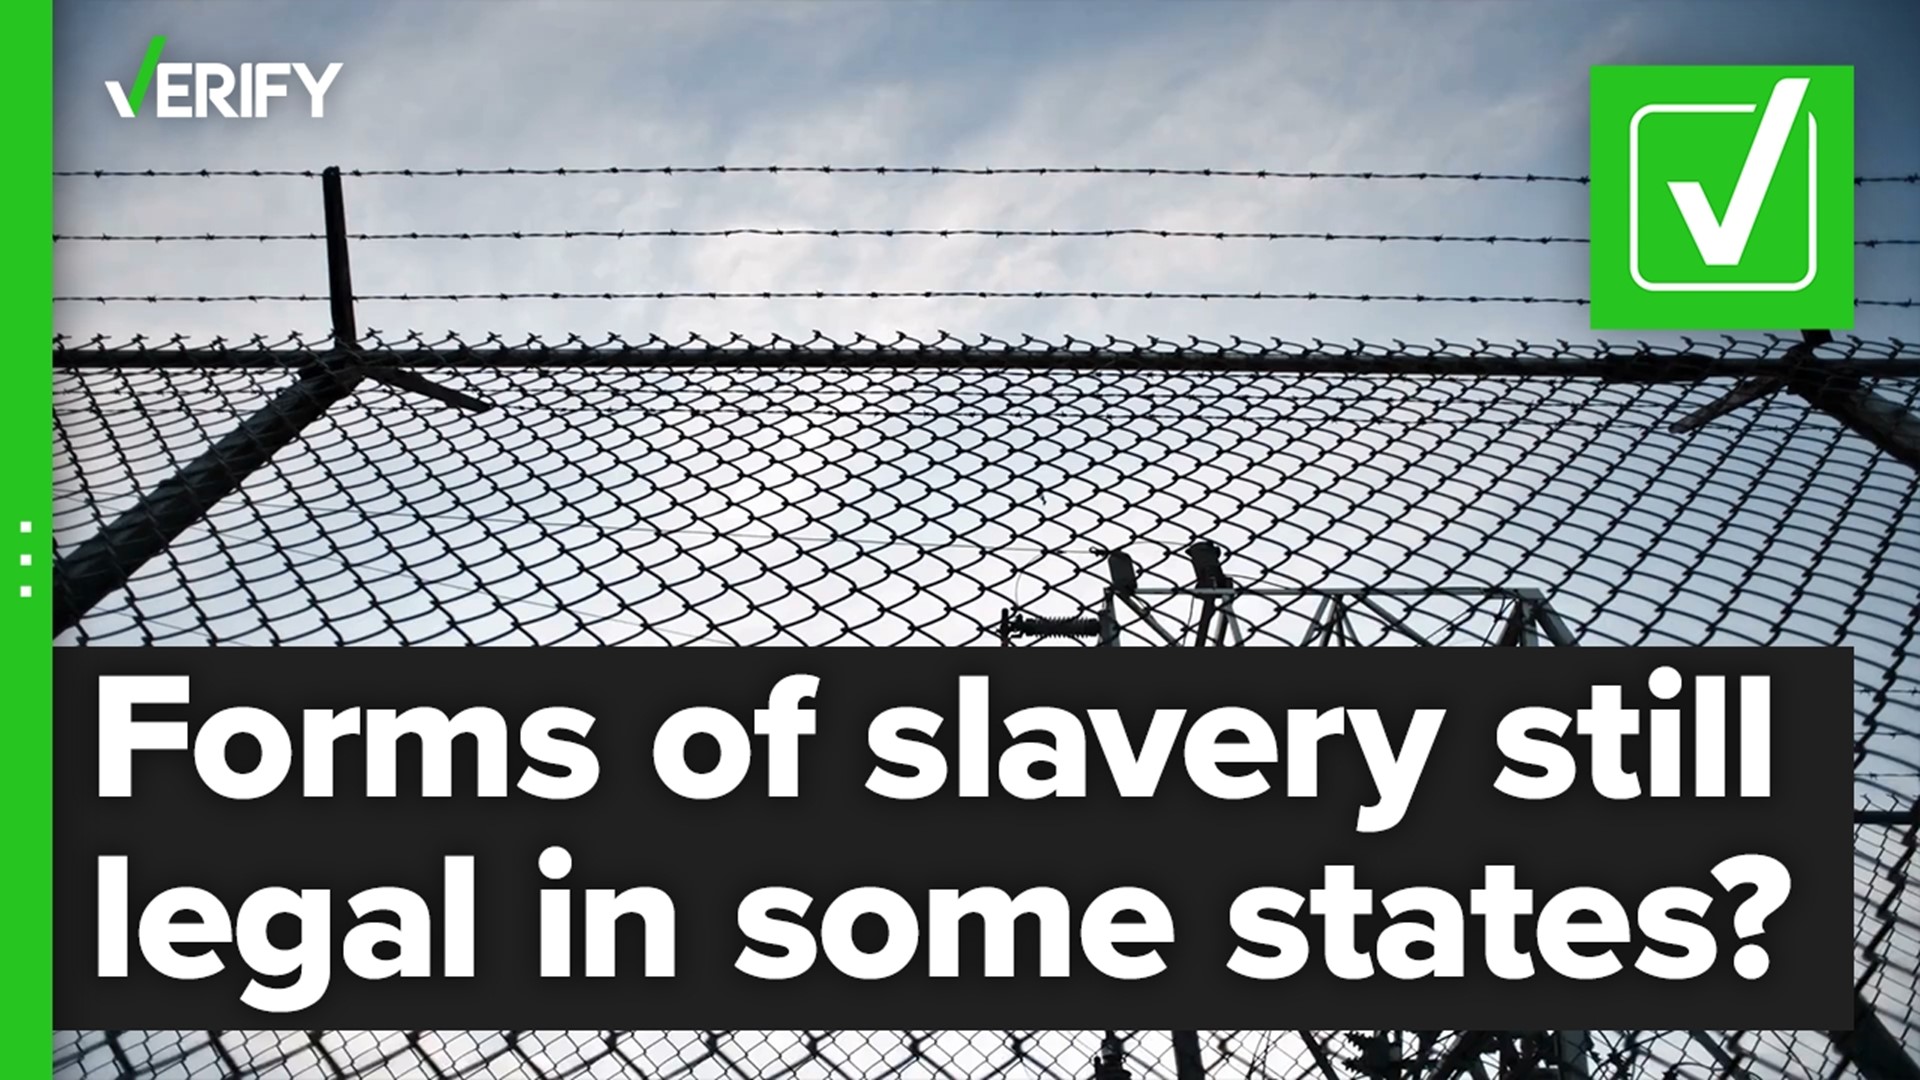 Due to an exception clause in the 13th Amendment of the U.S. Constitution, slavery is still legal in many states as a punishment for crime.